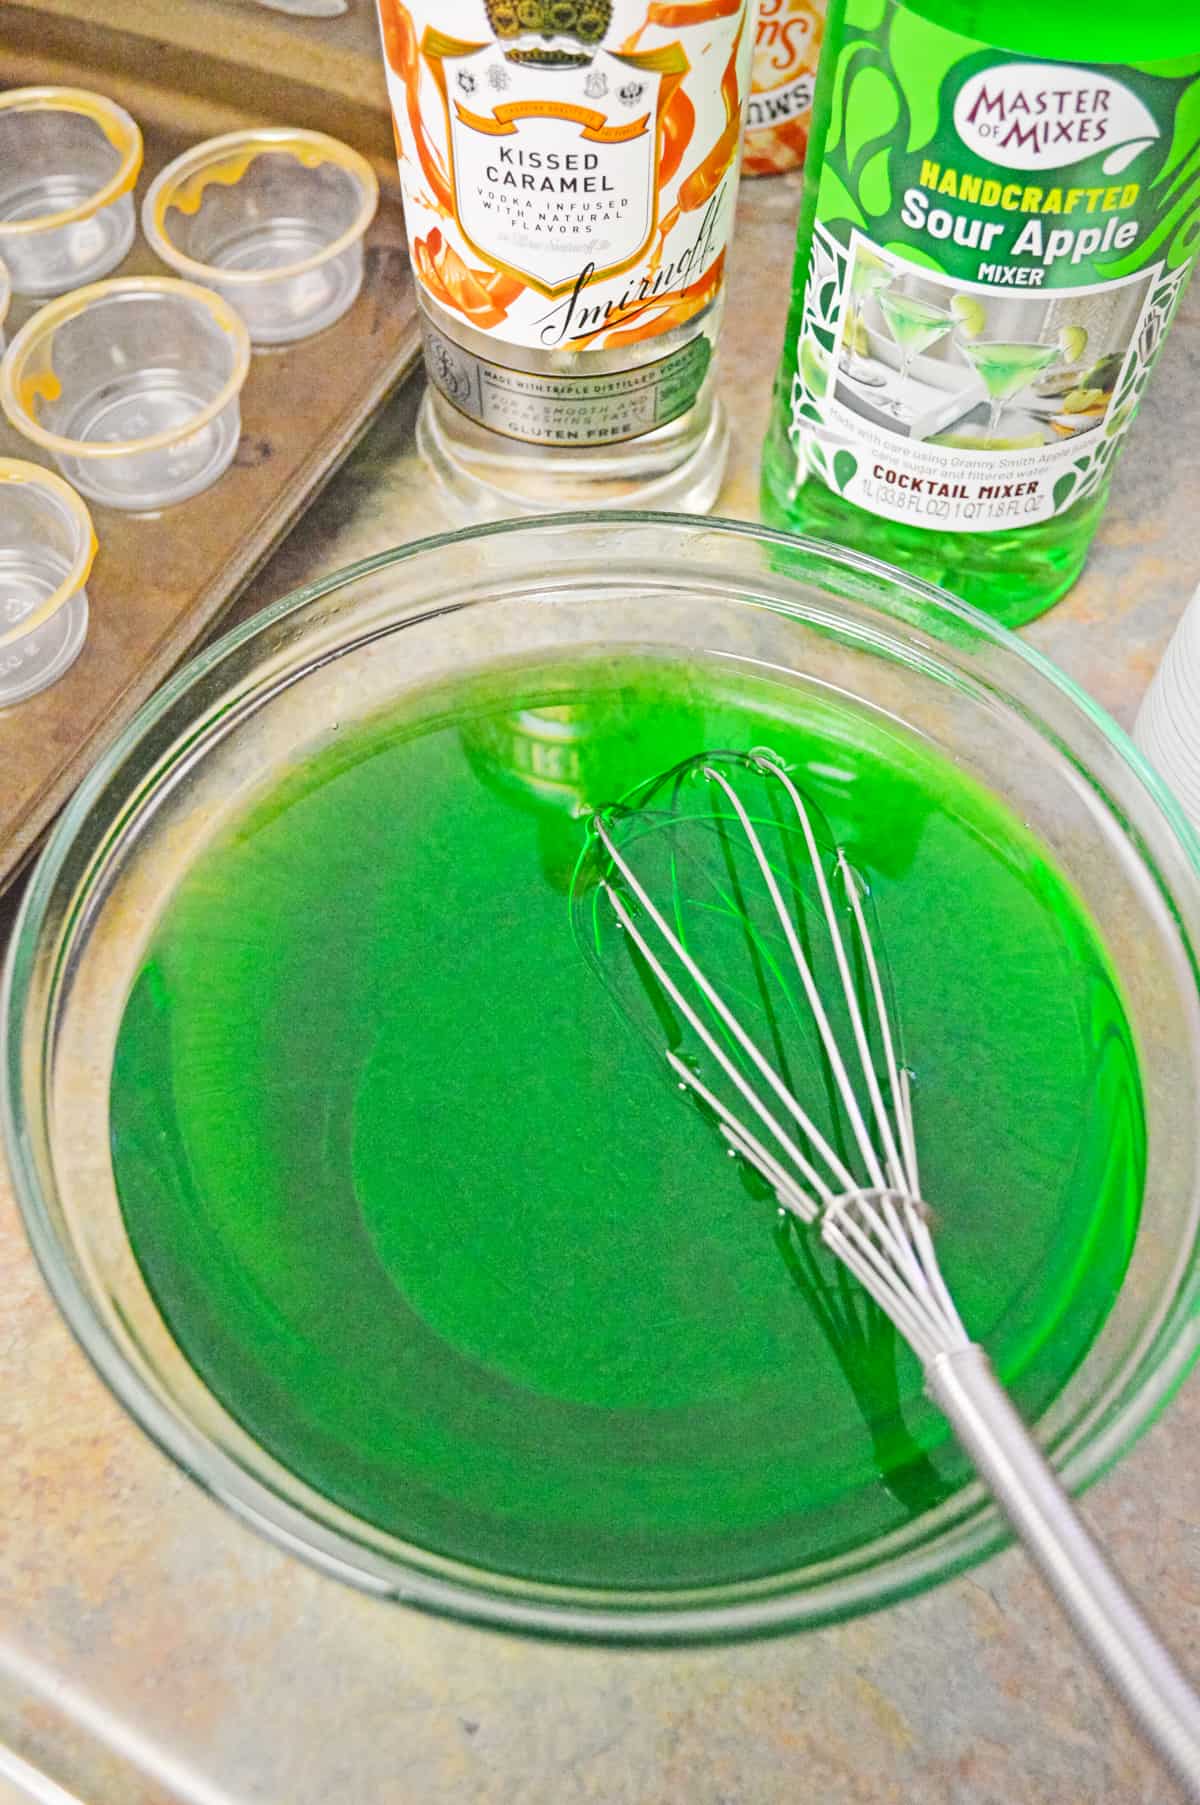 Glass bowl with green jello and wire whisk. Empty shot glasses, bottle of caramel vodka, and sour apple mixer are in background